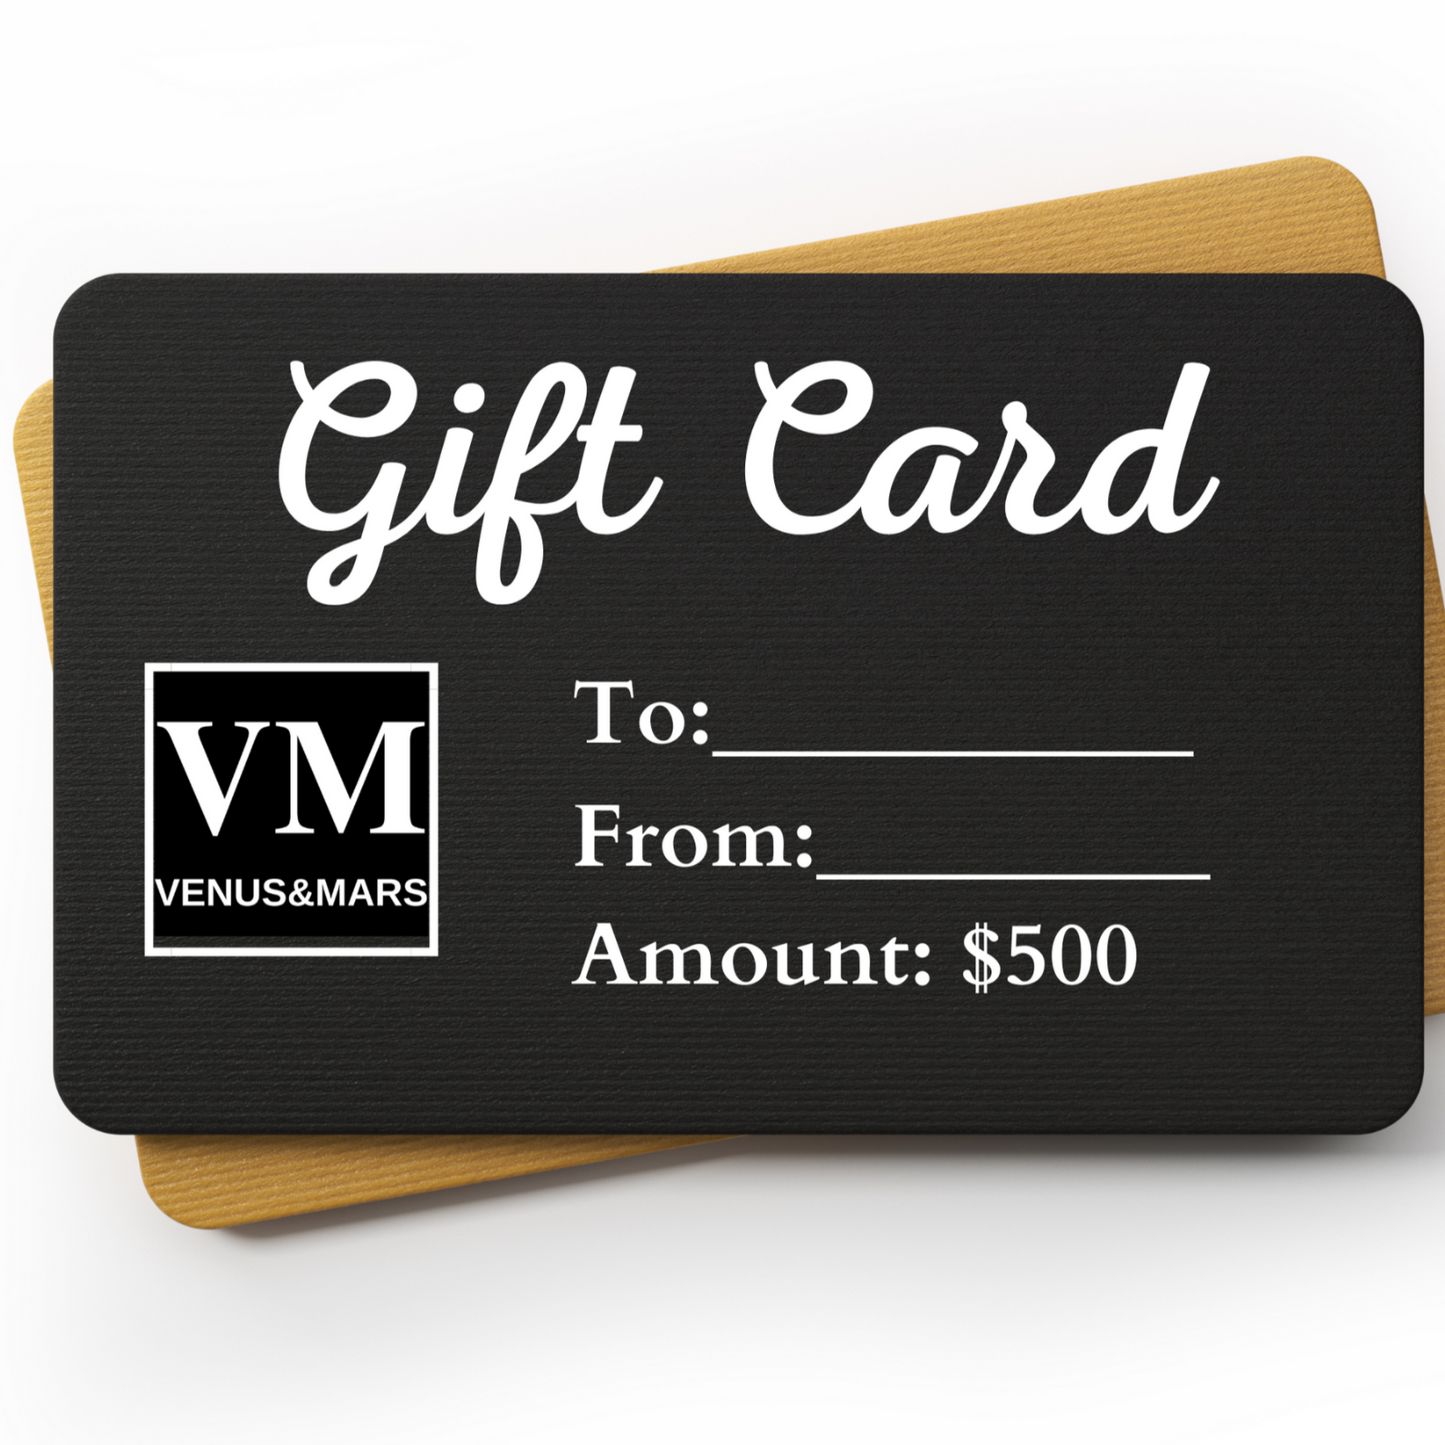 The VM Gift Card